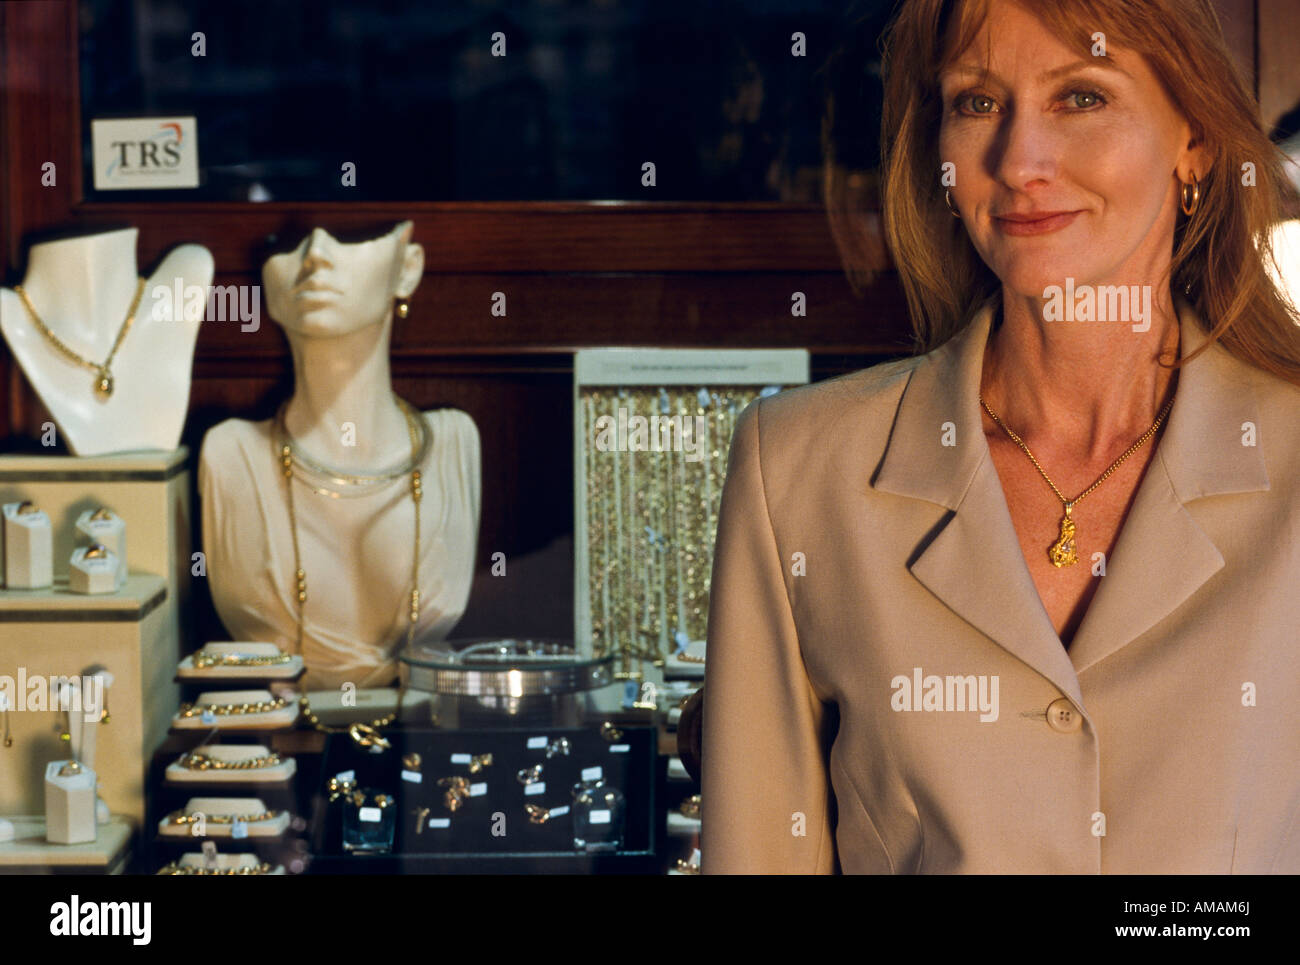 Woman in jewelry shop Stock Photo